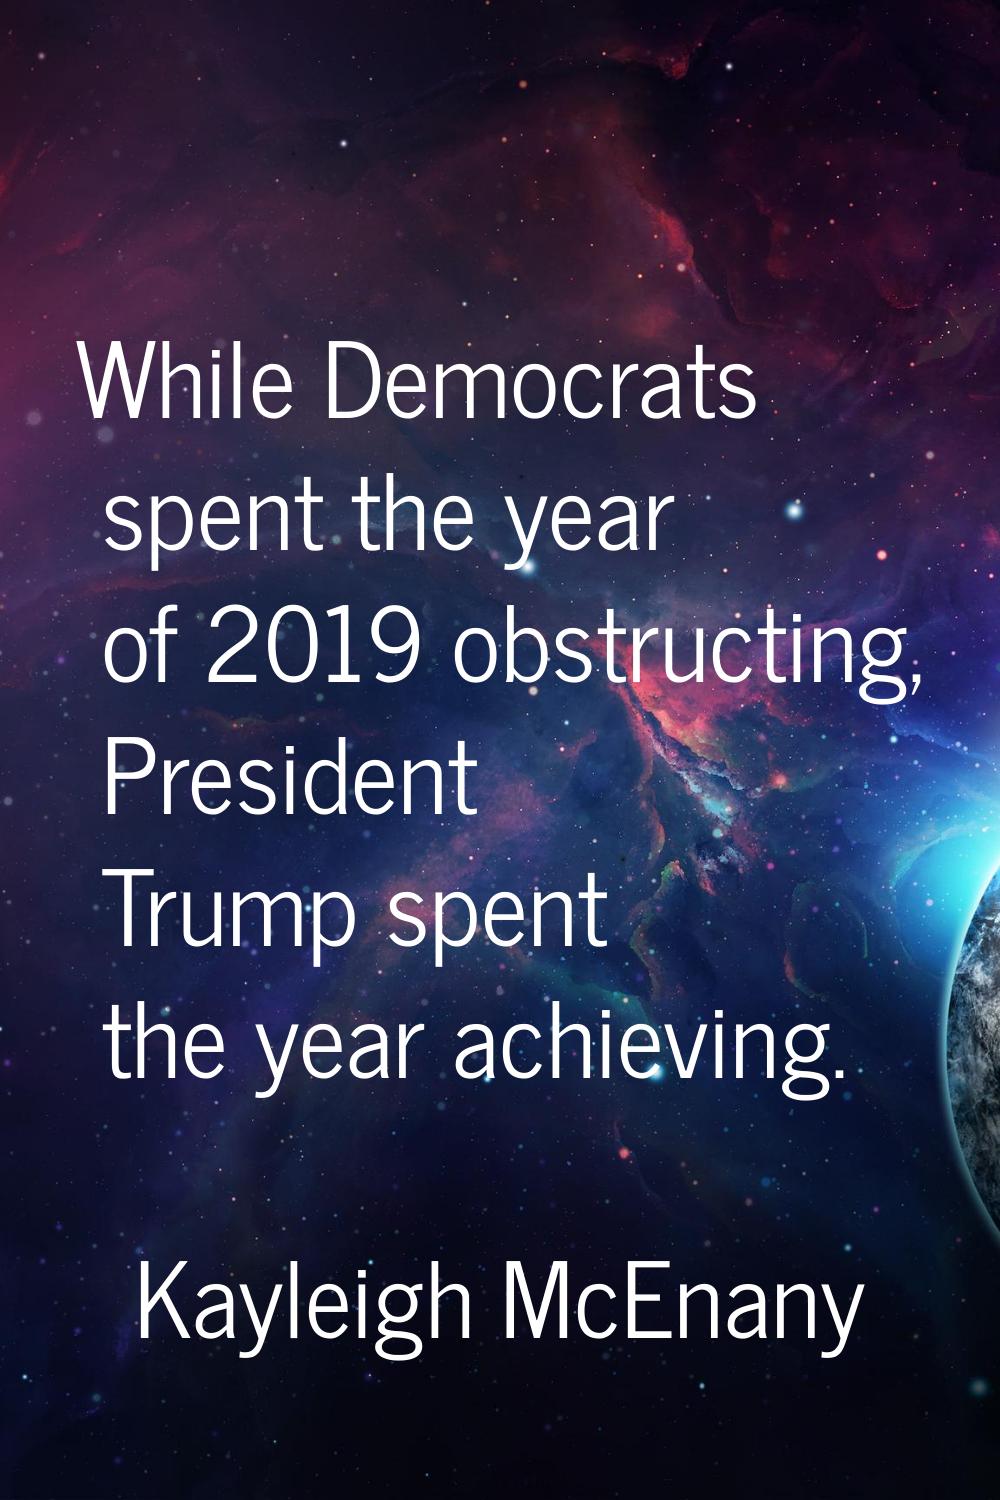 While Democrats spent the year of 2019 obstructing, President Trump spent the year achieving.